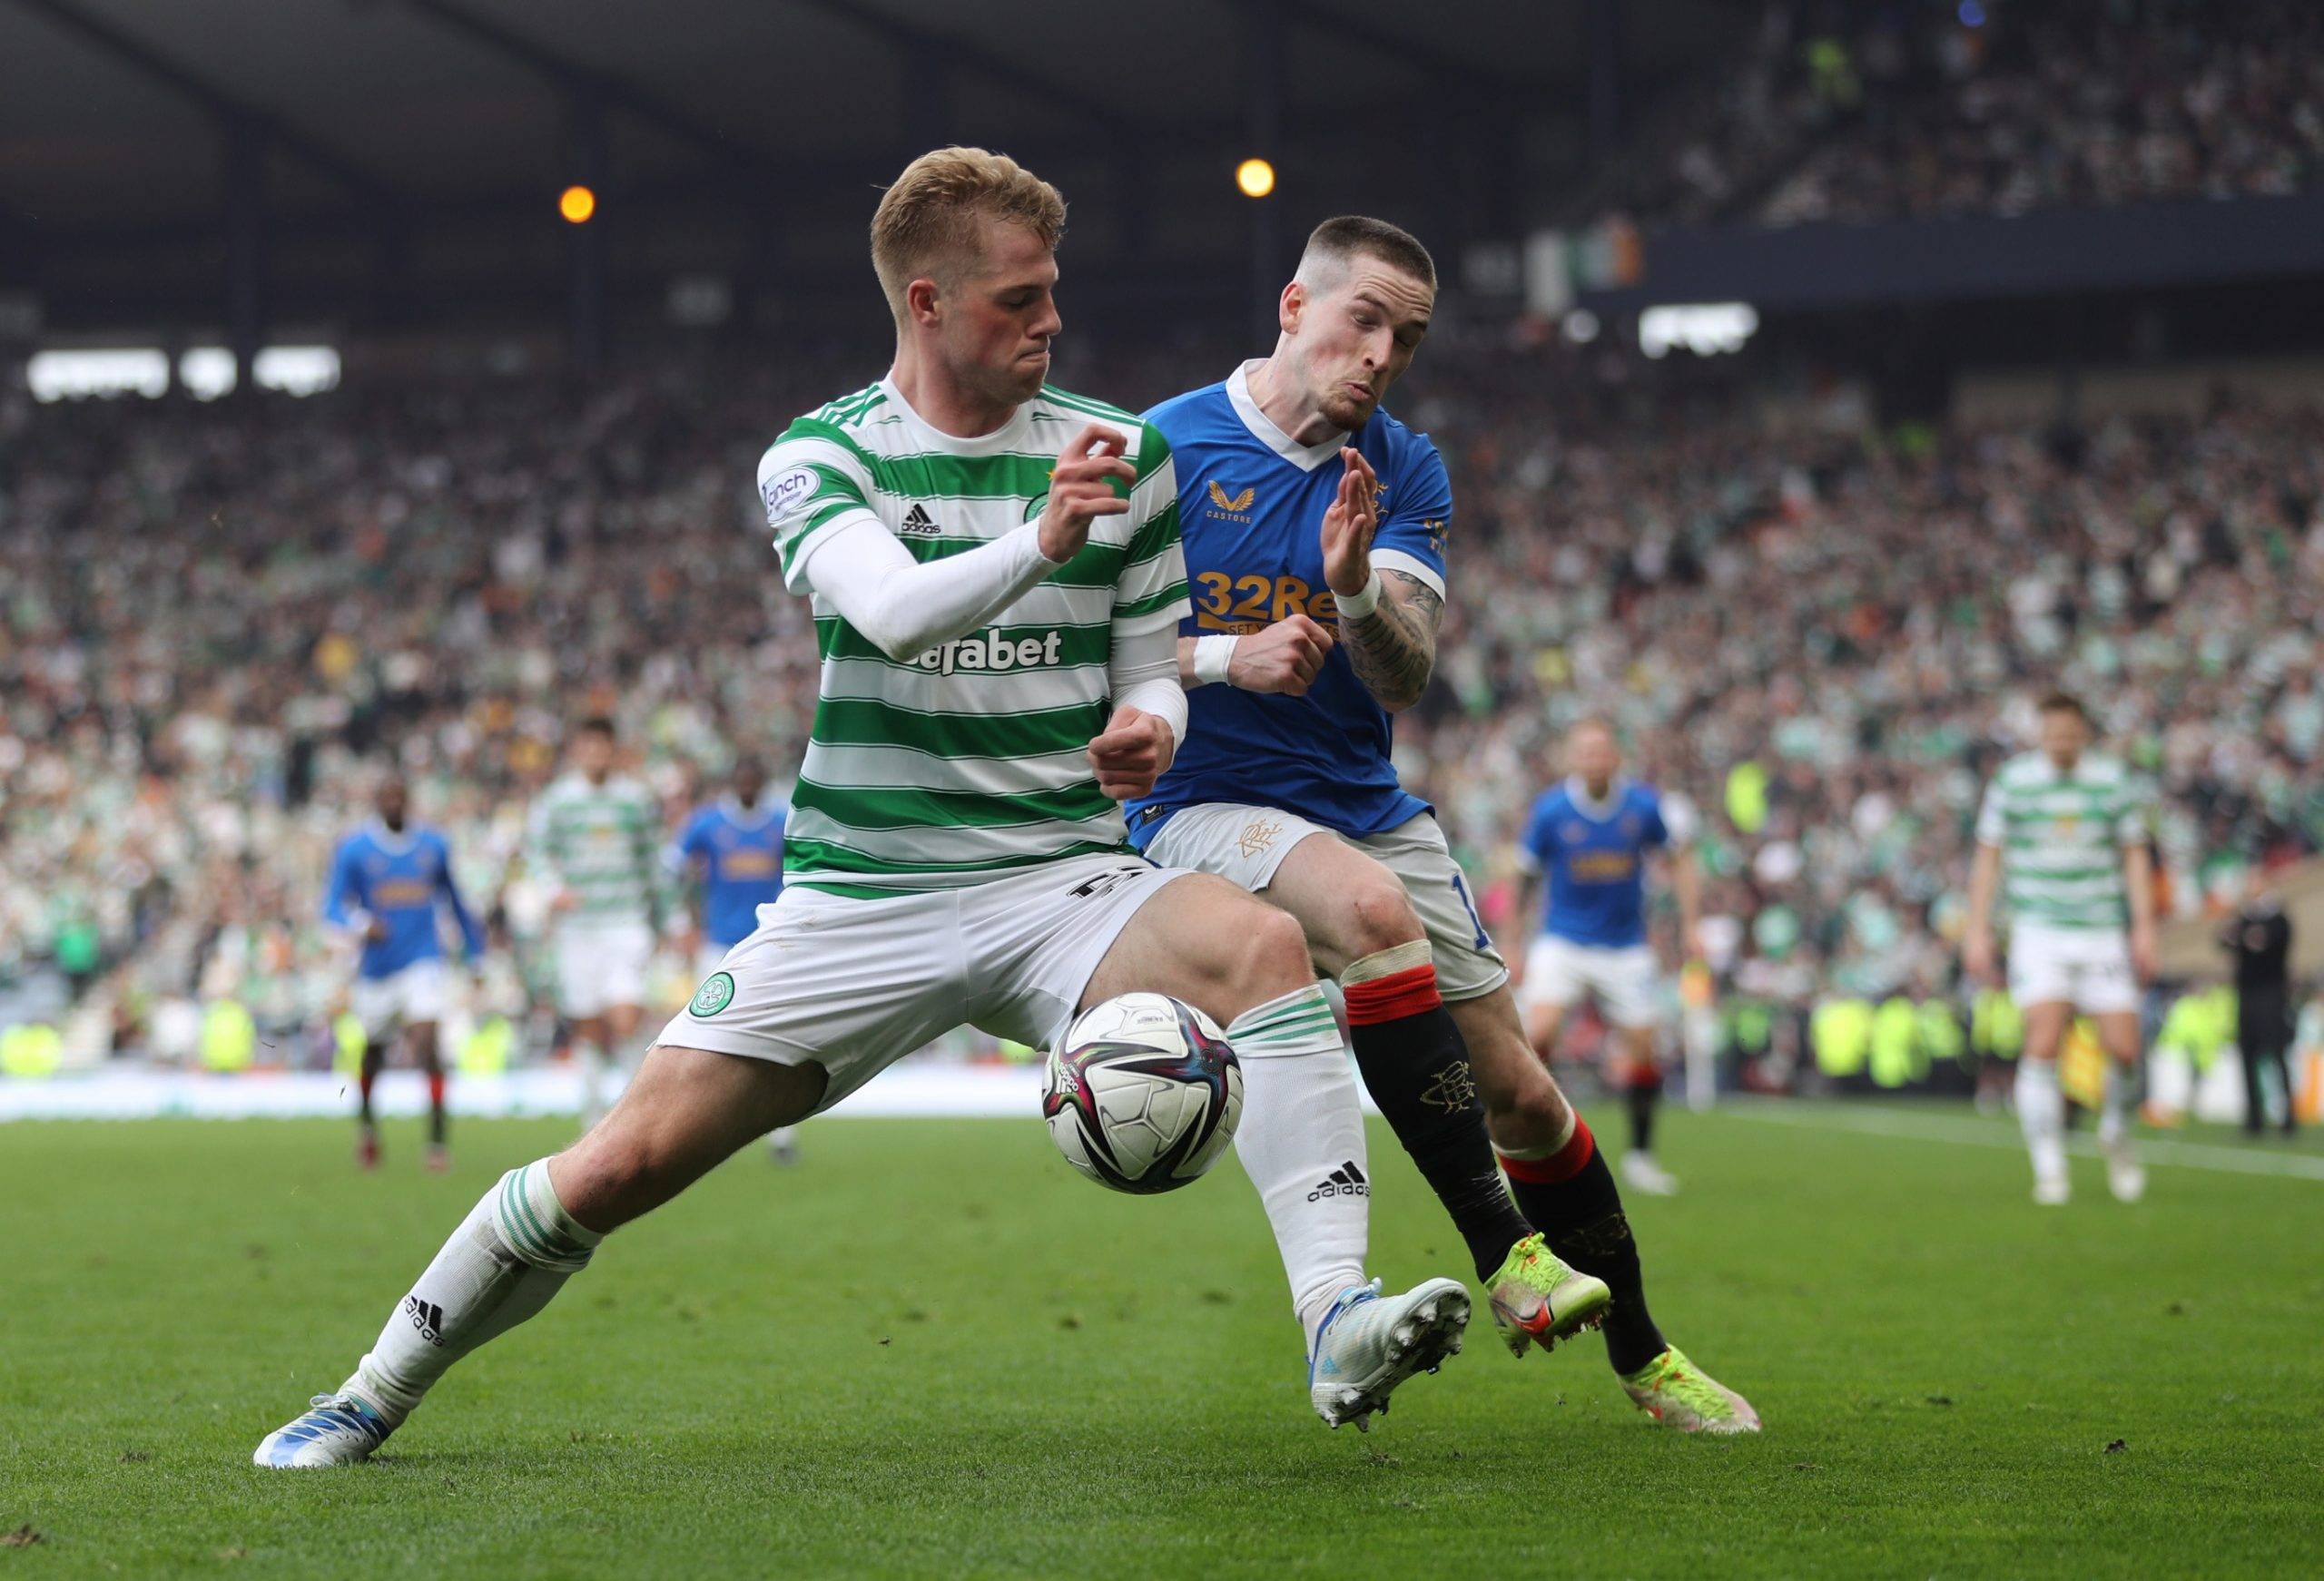 Celtic: Stephen Welsh linked with Sheffield Wednesday loan move - Celtic News